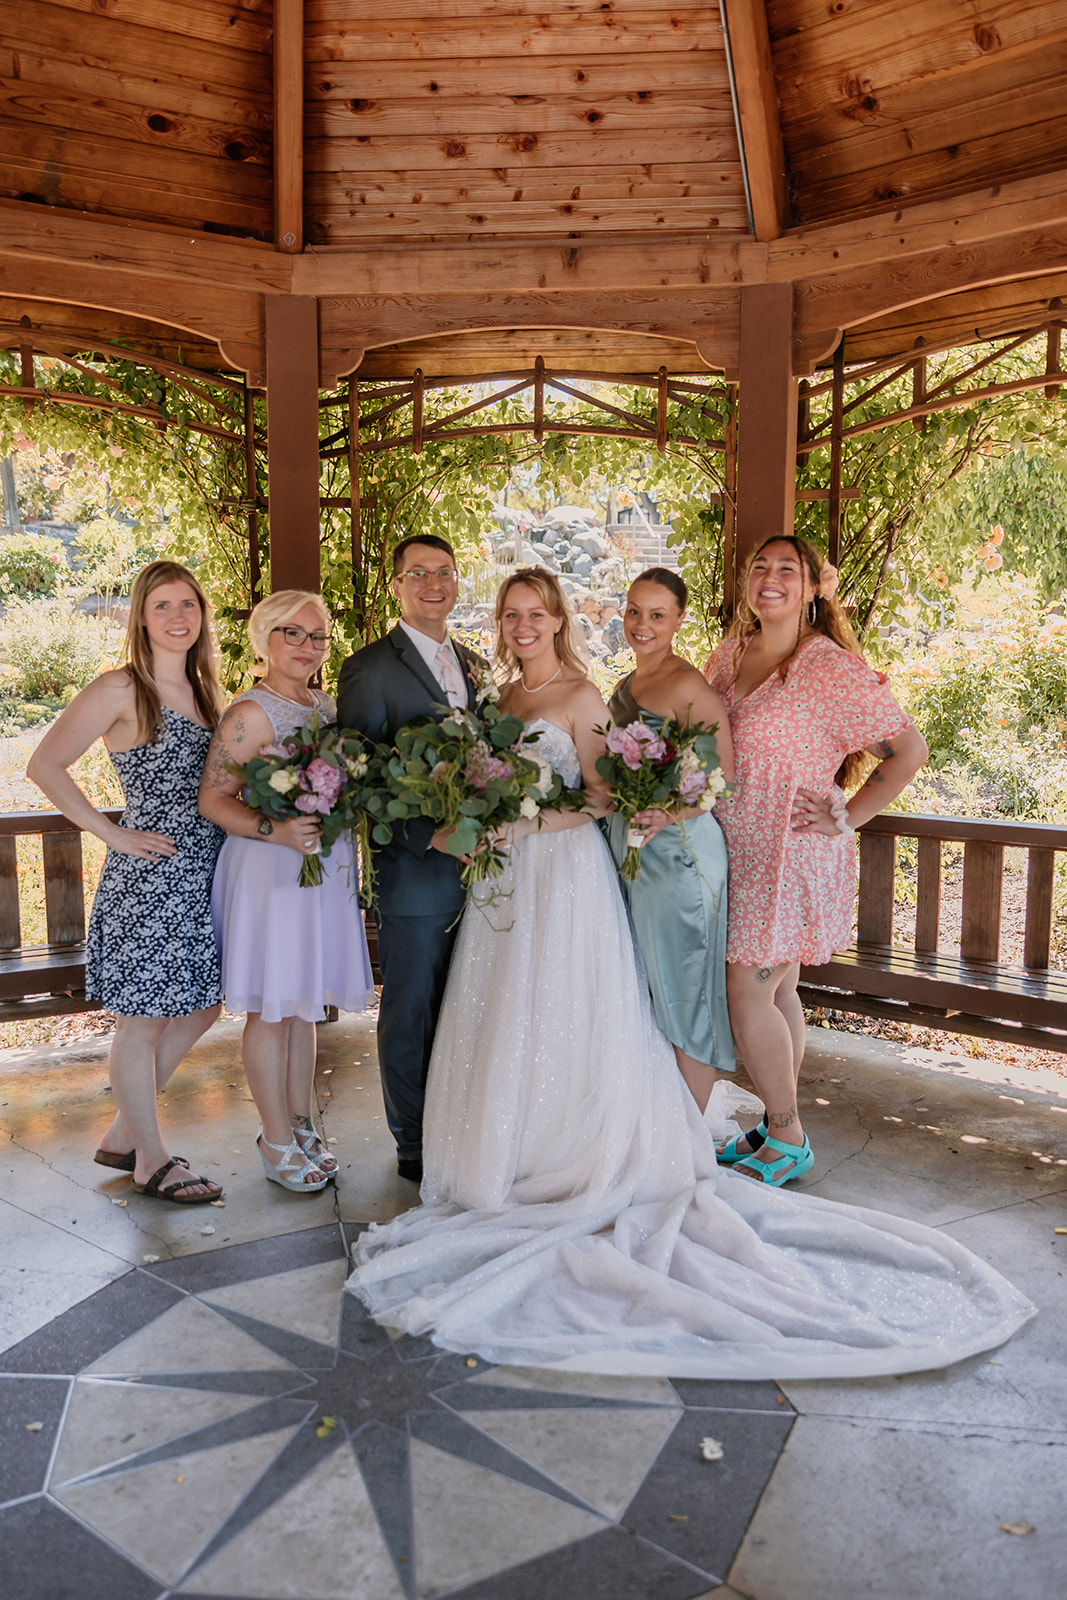 A bride and groom stand together under a gazebo, with women posing with them. The bride holds a bouquet, and all are smiling.